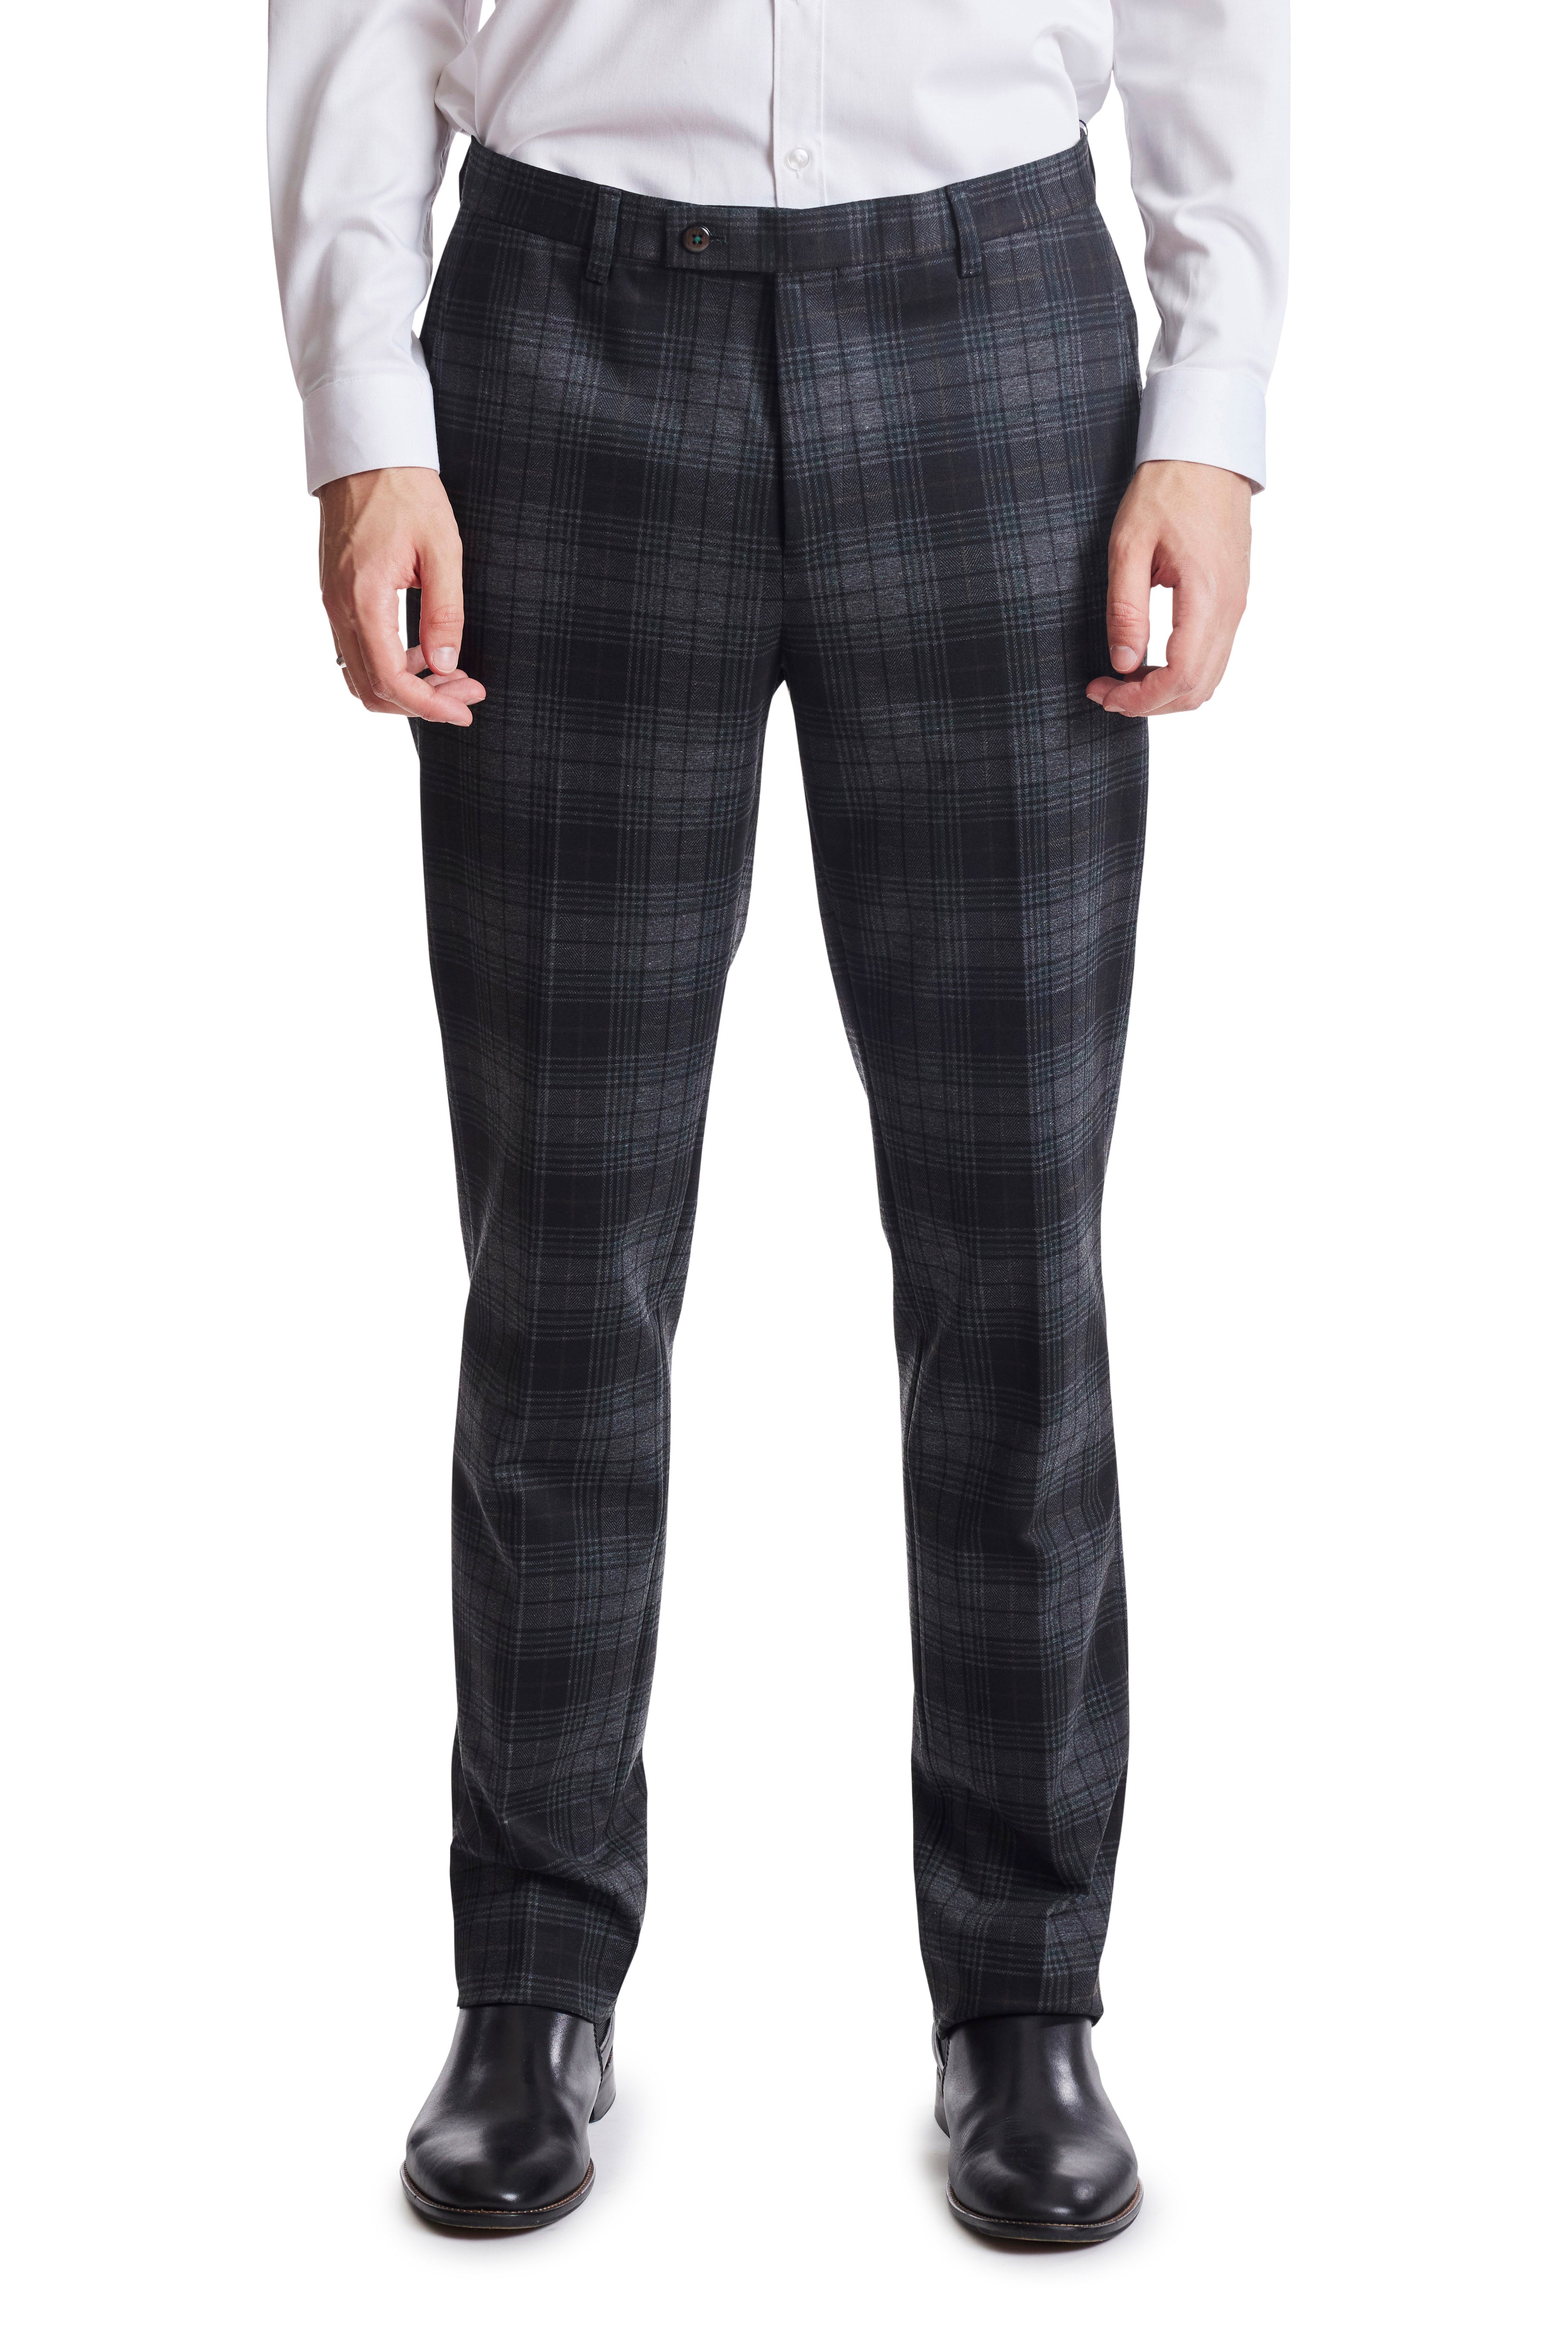 Men Tailored Trousers Suit Pants Check Plaid Western Style Casual Slim Black  Grey Navy Office Business Wear | Wish